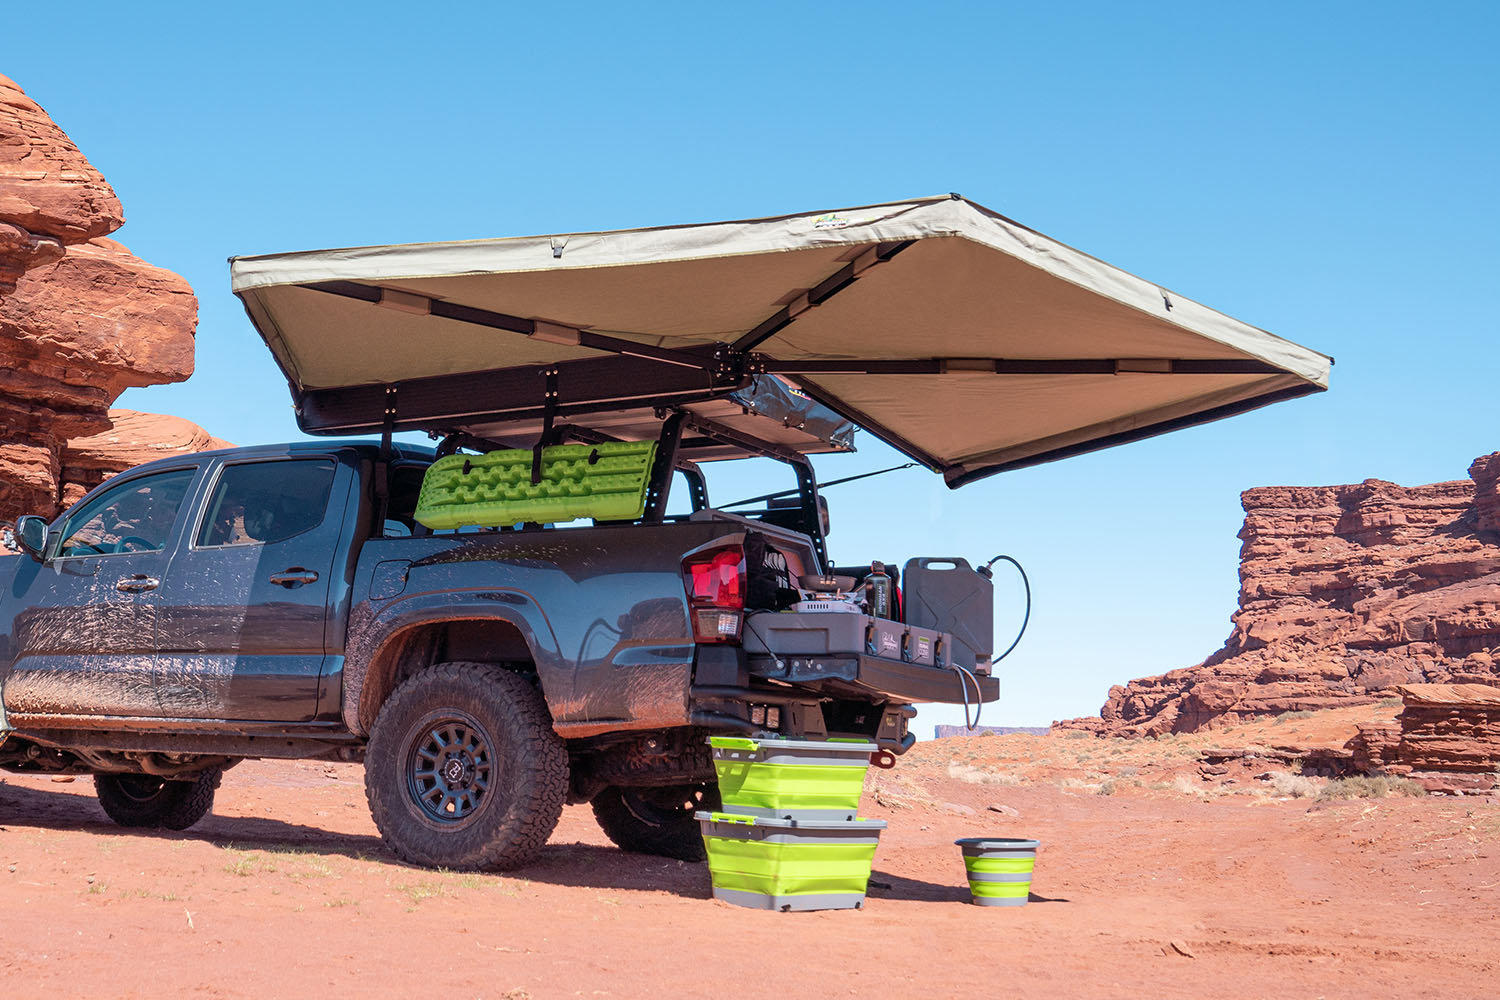 In a 4Runner, can the hatch be safely opened with the awning deployed?